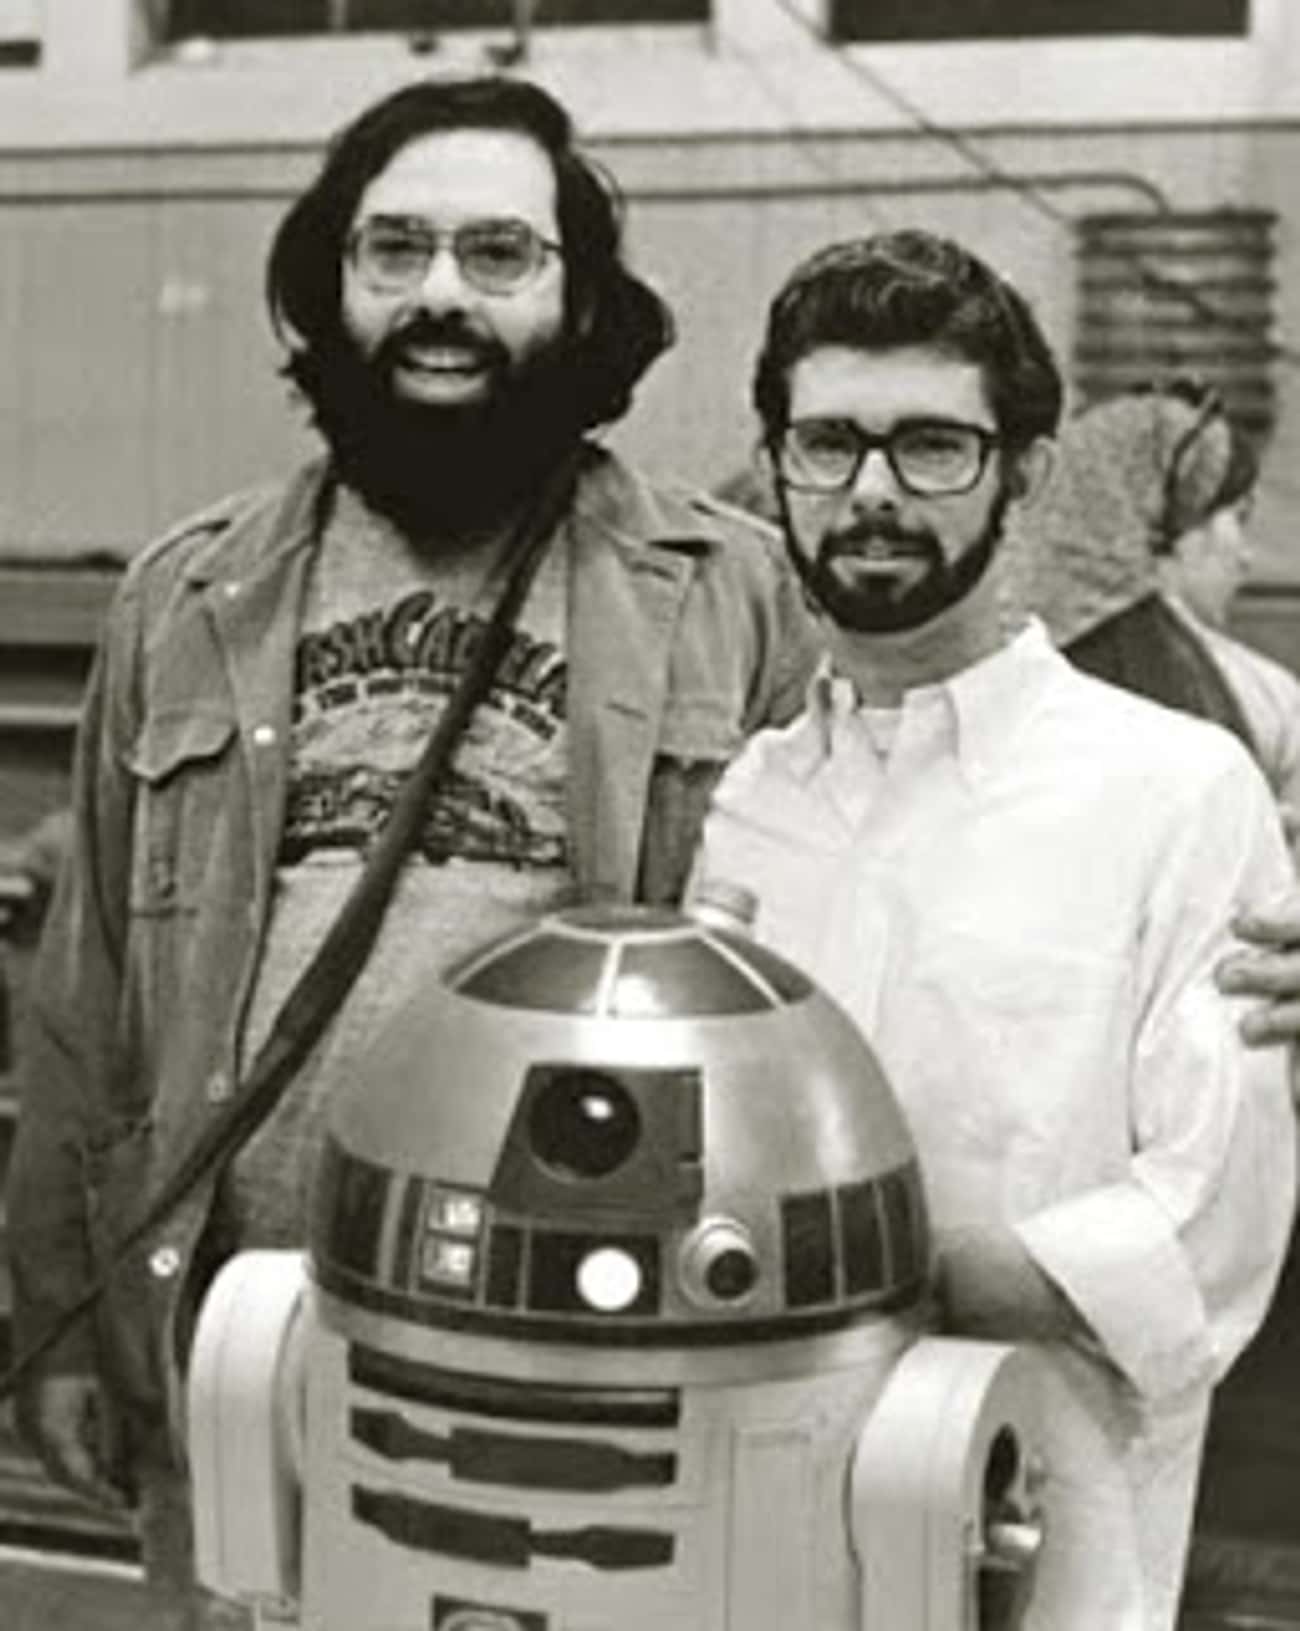 Young George Lucas with R2D2